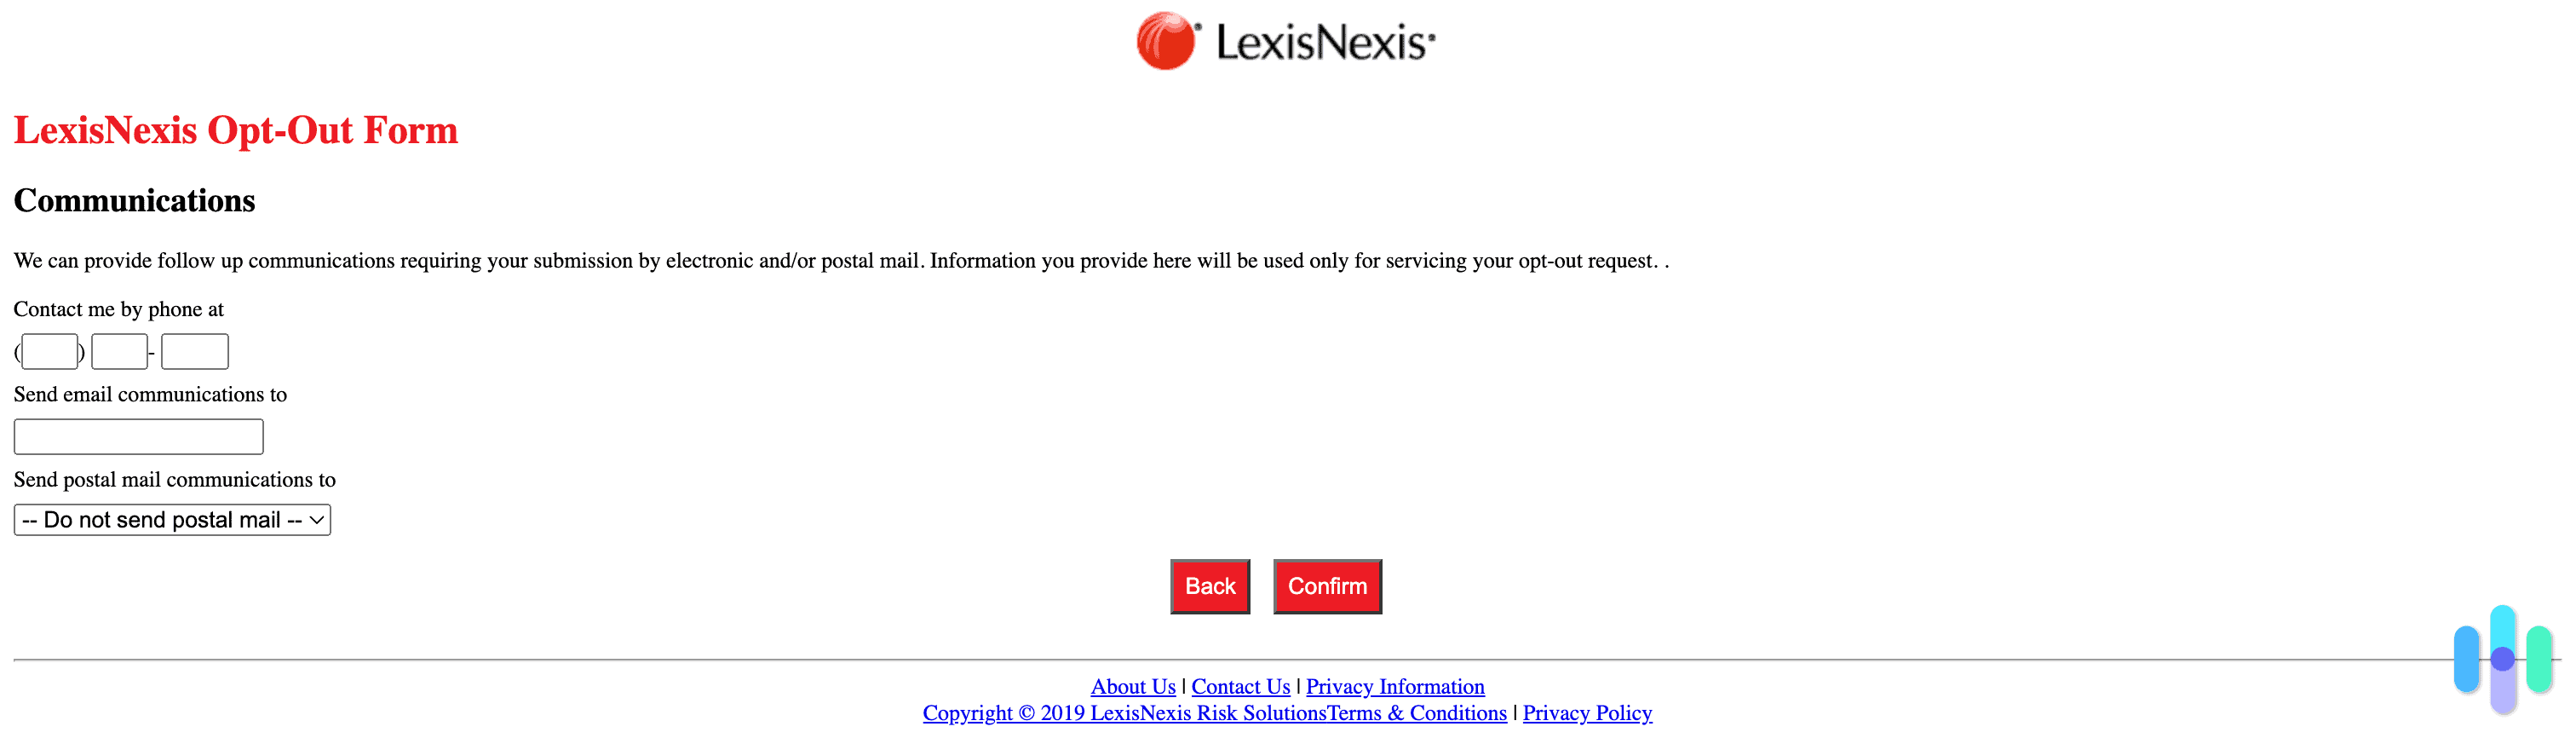 The LexisNexis opt out form communications section